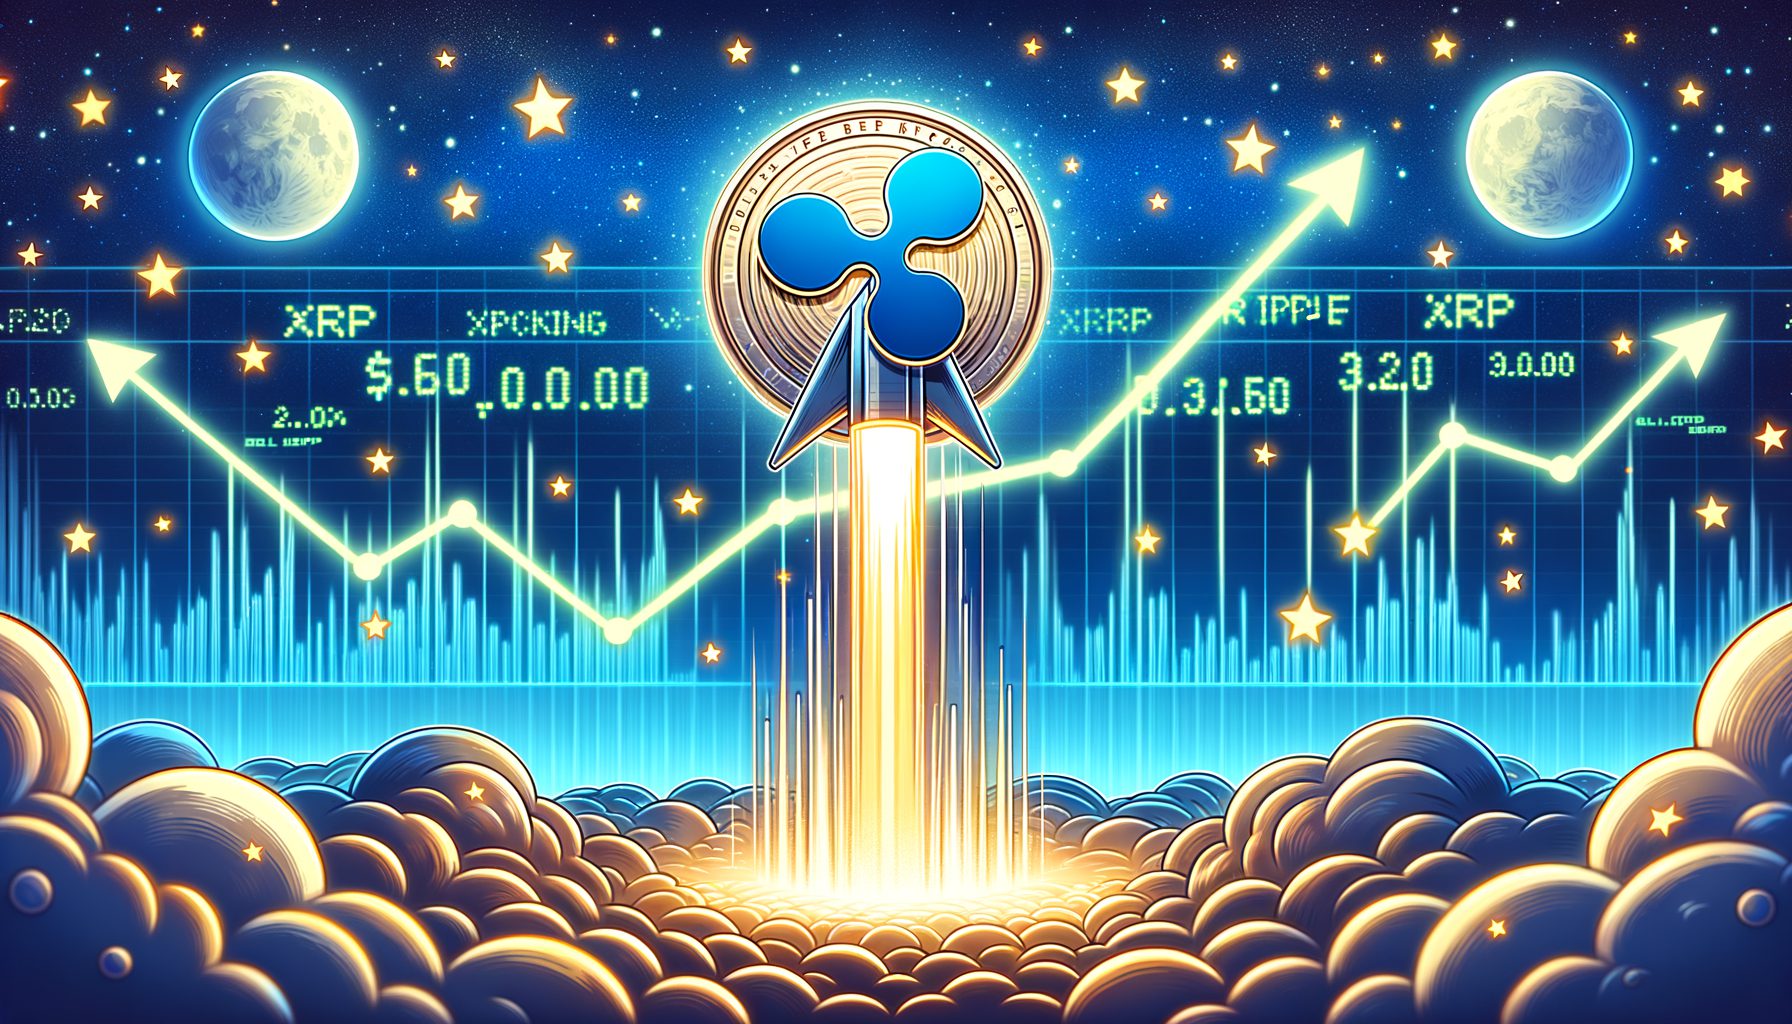 Ripple Stablecoin News Drives XRP Volume 32% as Price Reacts